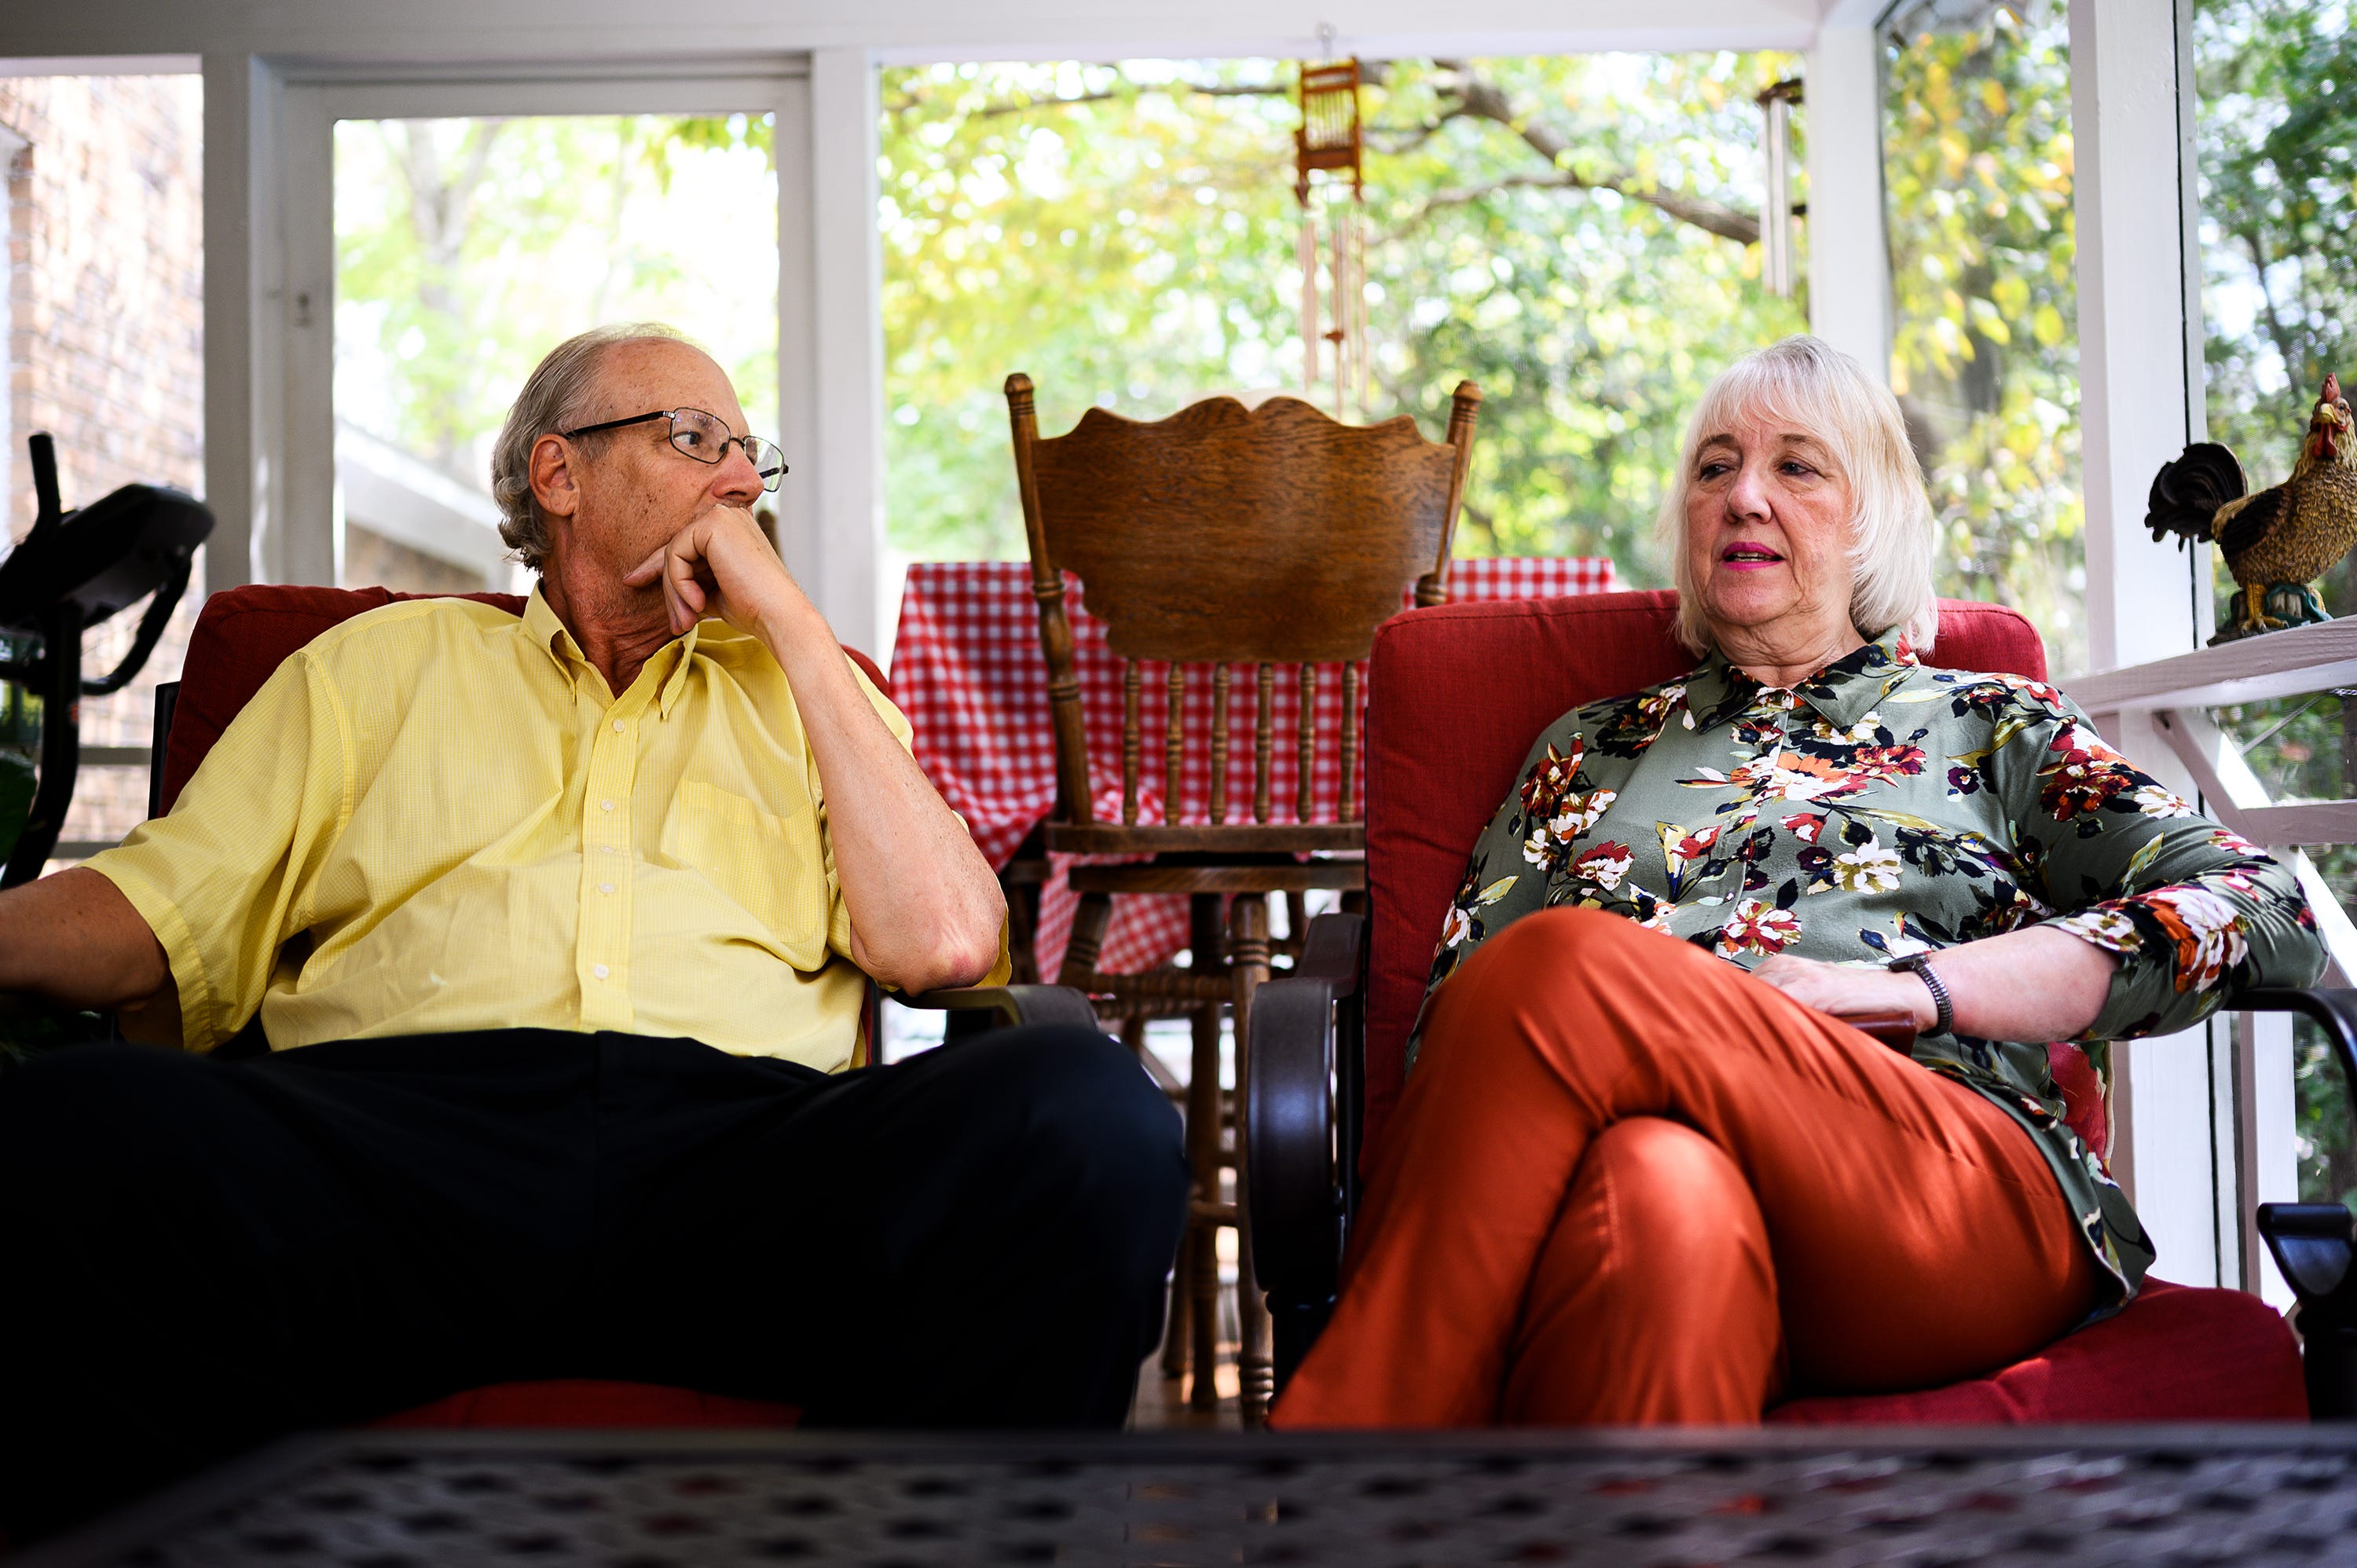 Dolores Stegelin sits with her husband, Forrest, in the sun room of their home in Columbia, South Carolina. They are each retired professors.